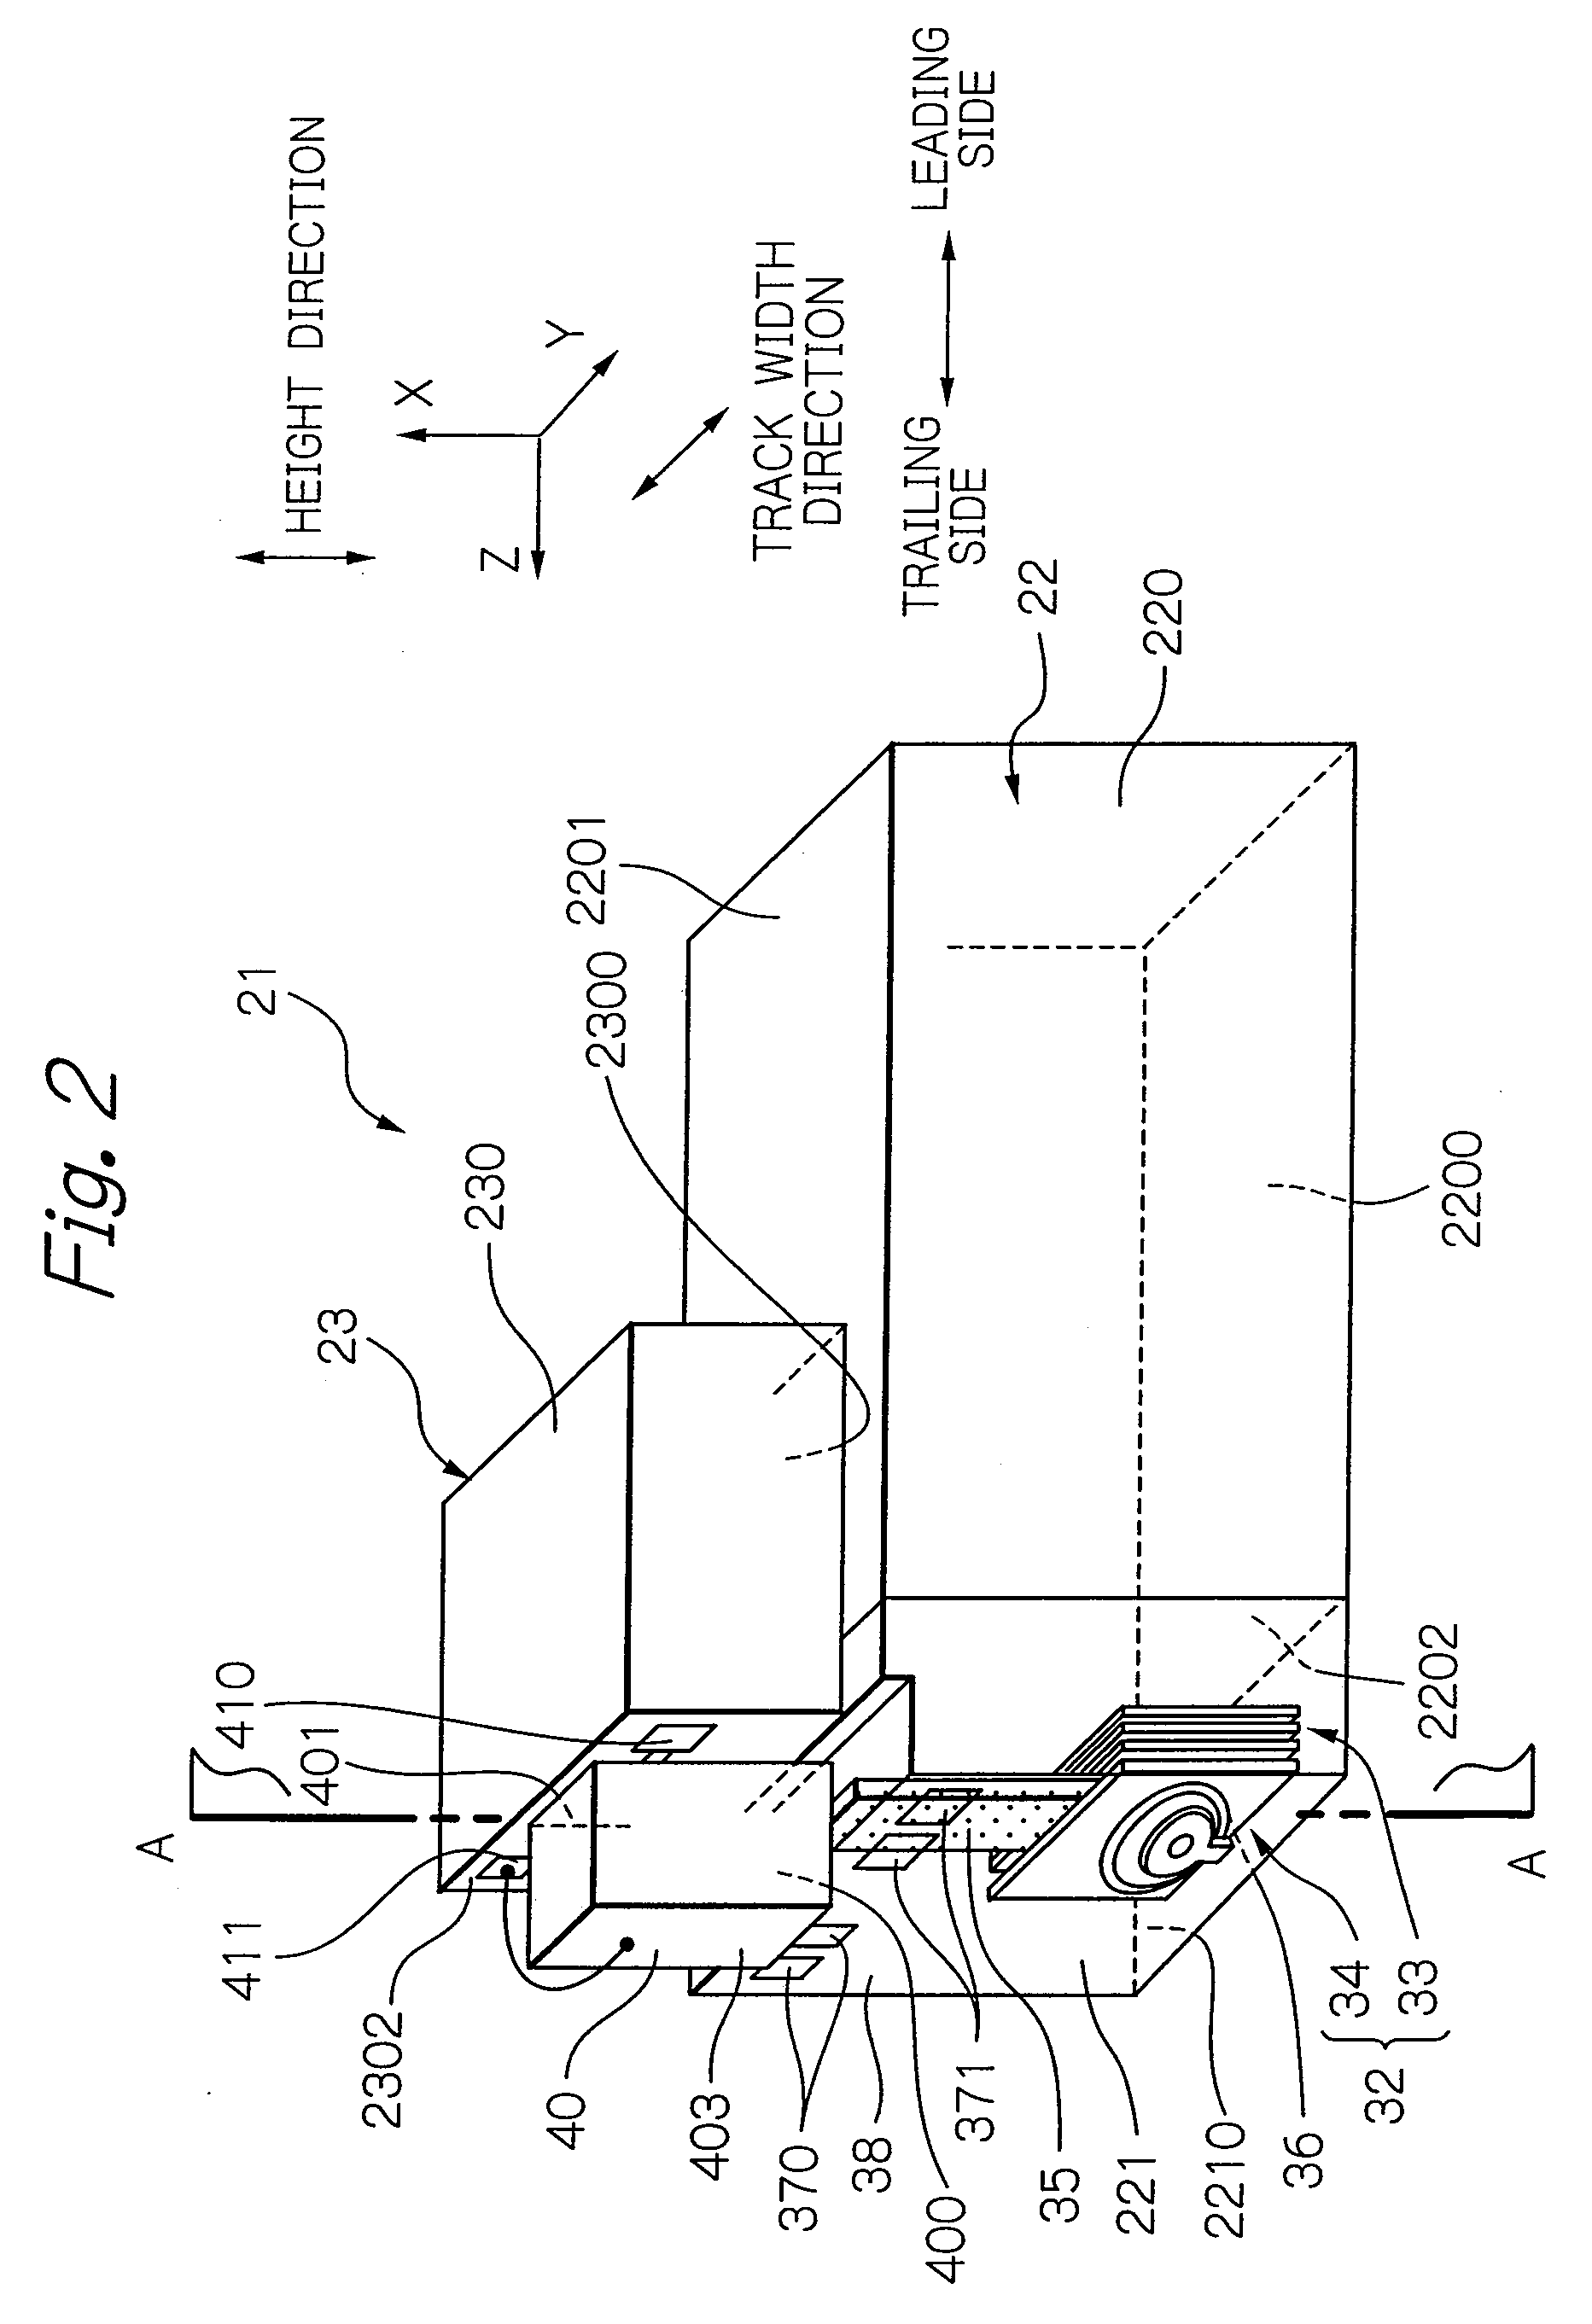 Near-field light generating element and heat-assisted magnetic recording head utilizing surface plasmon mode